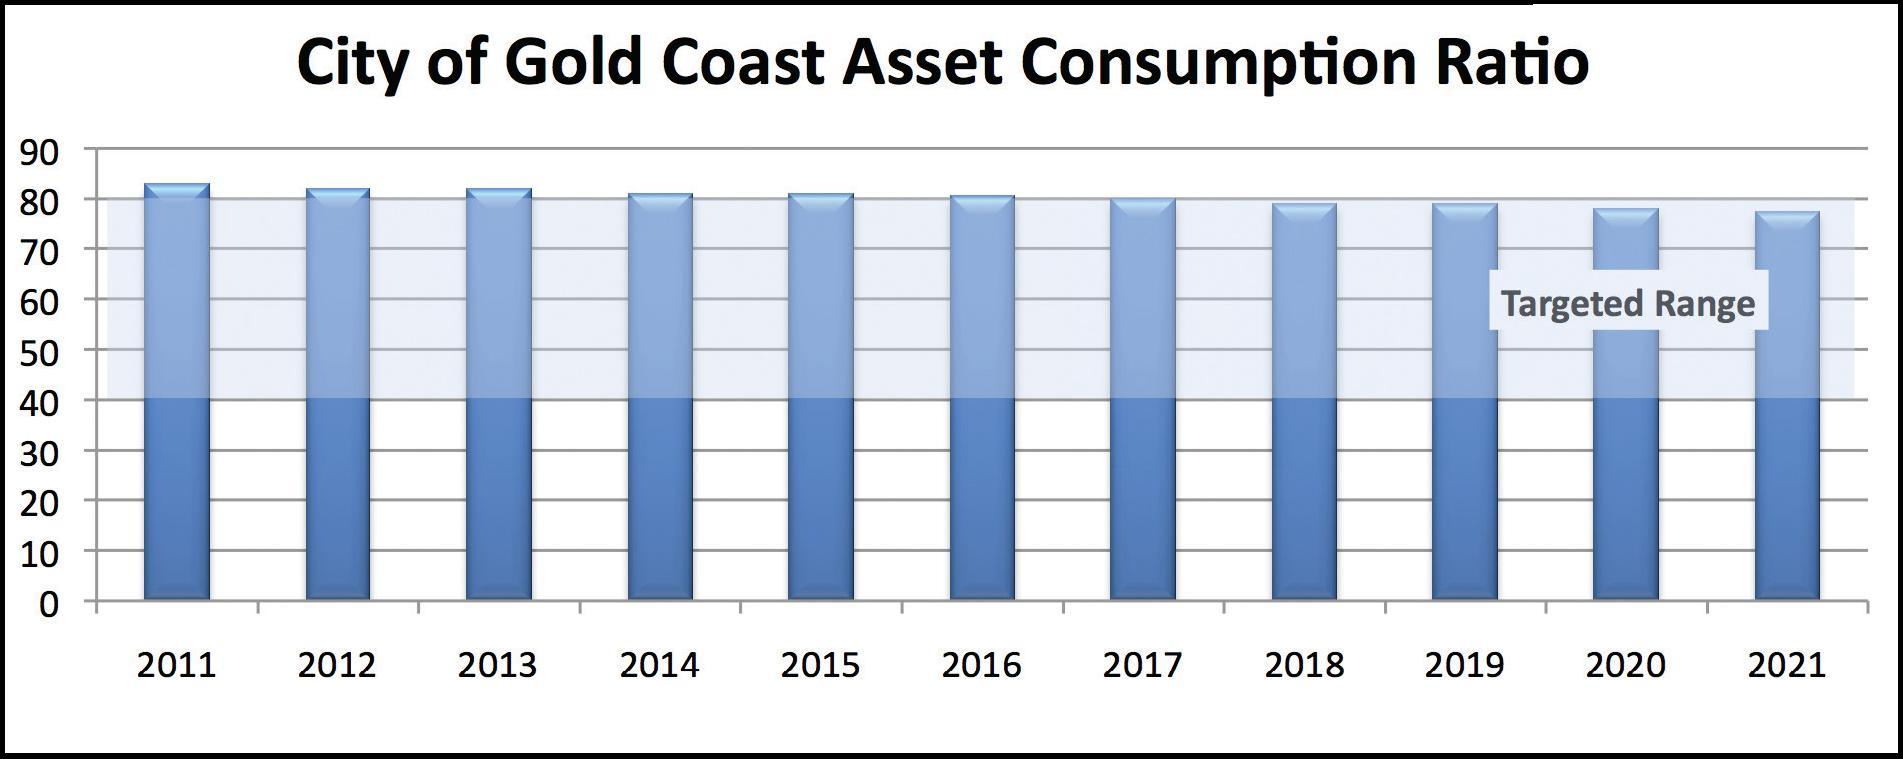 Figure 14 is a bar graph of the period 2011 to 2021 for the city of Gold Coast.  The bars represent the overall asset consumption ratio of its infrastructure that it wishes to attain.  For 2011 the bar is at approximately 82 percent and it gradually declines by 2021 to about 78 percent. It illustrates the gradual decline in the overall asset consumption ratio that illustrates that there is a gradual decline in the value and condition of the city's infrastructure but that the overall condition is still within targets set by the city. The chart has a second element that shows the target range for condition is beween 40 and 80 percent. 